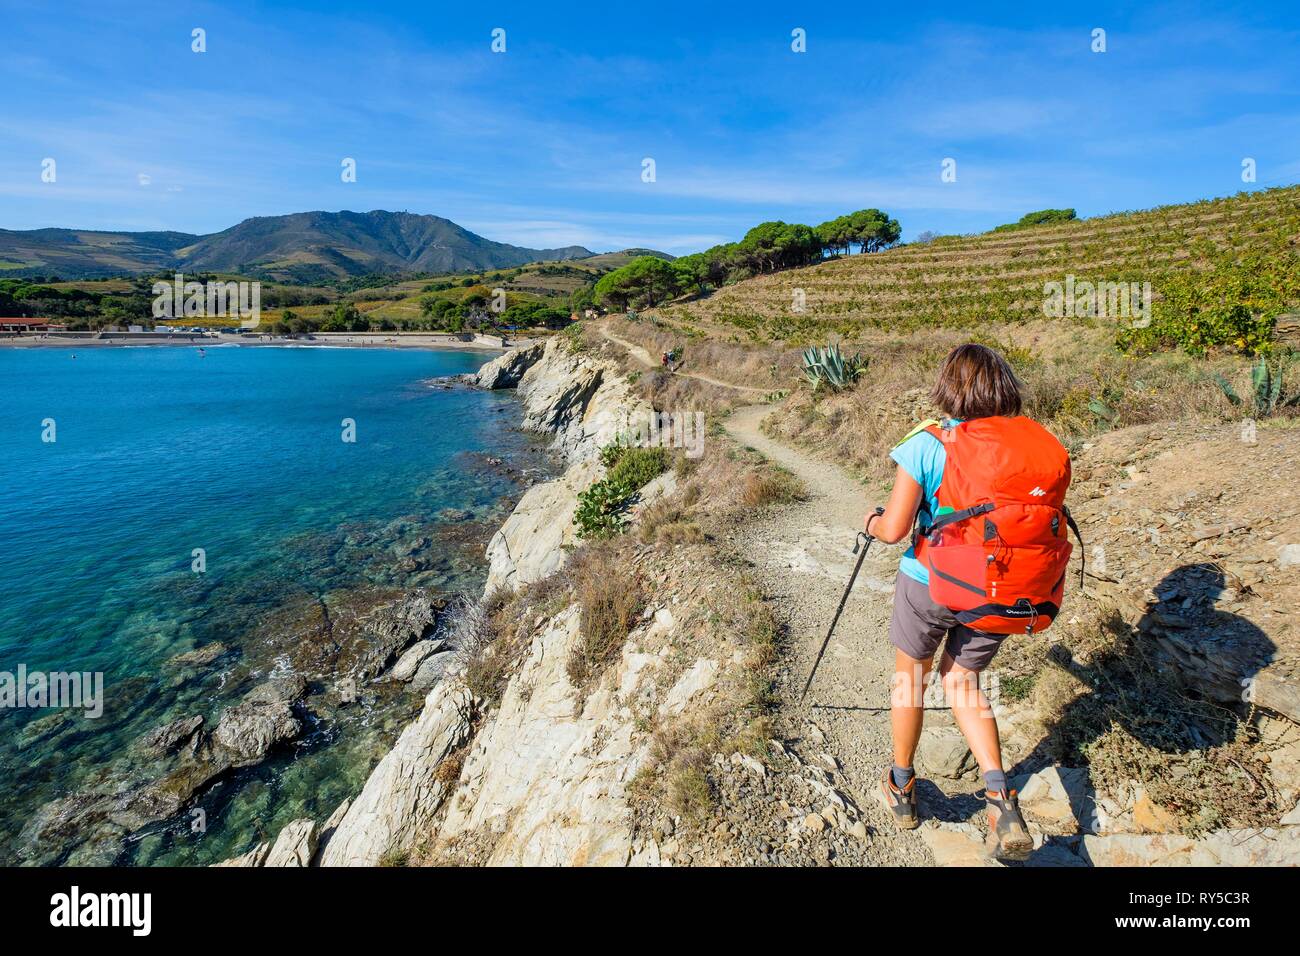 France, Pyrenees Orientales, Cote Vermeille, hiking from Port-Vendres to Banyuls on the coastal path, Anse de Paulilles in the background Stock Photo